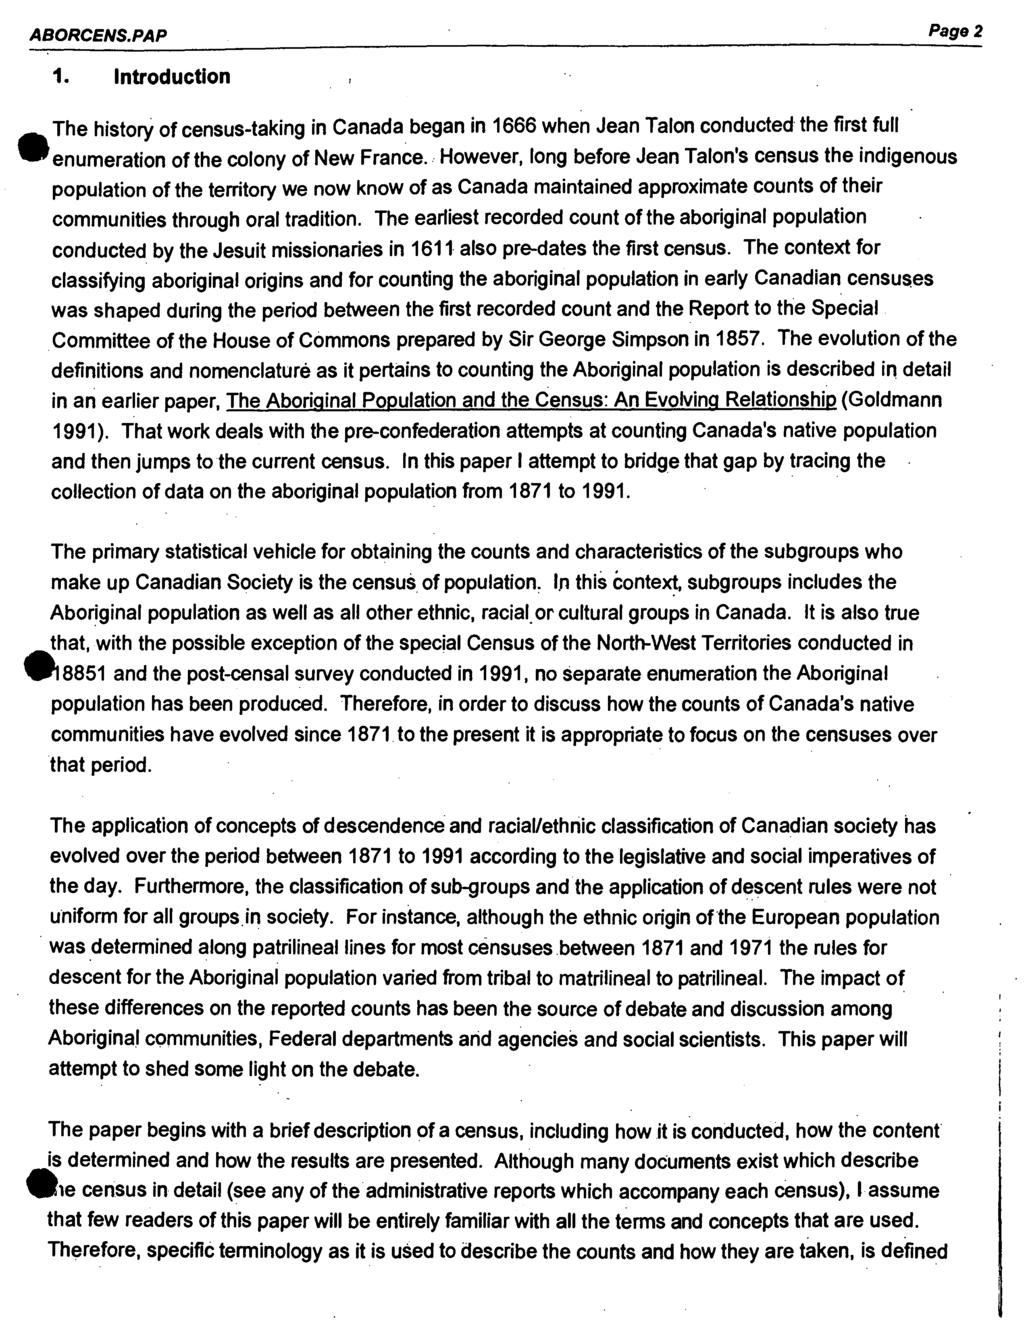 ABORCENS.PAP Page 2 1. Introduction Am, The history of census-taking in Canada began in 1666 when Jean Talon conducted the first full IP enumeration of the colony of New France.